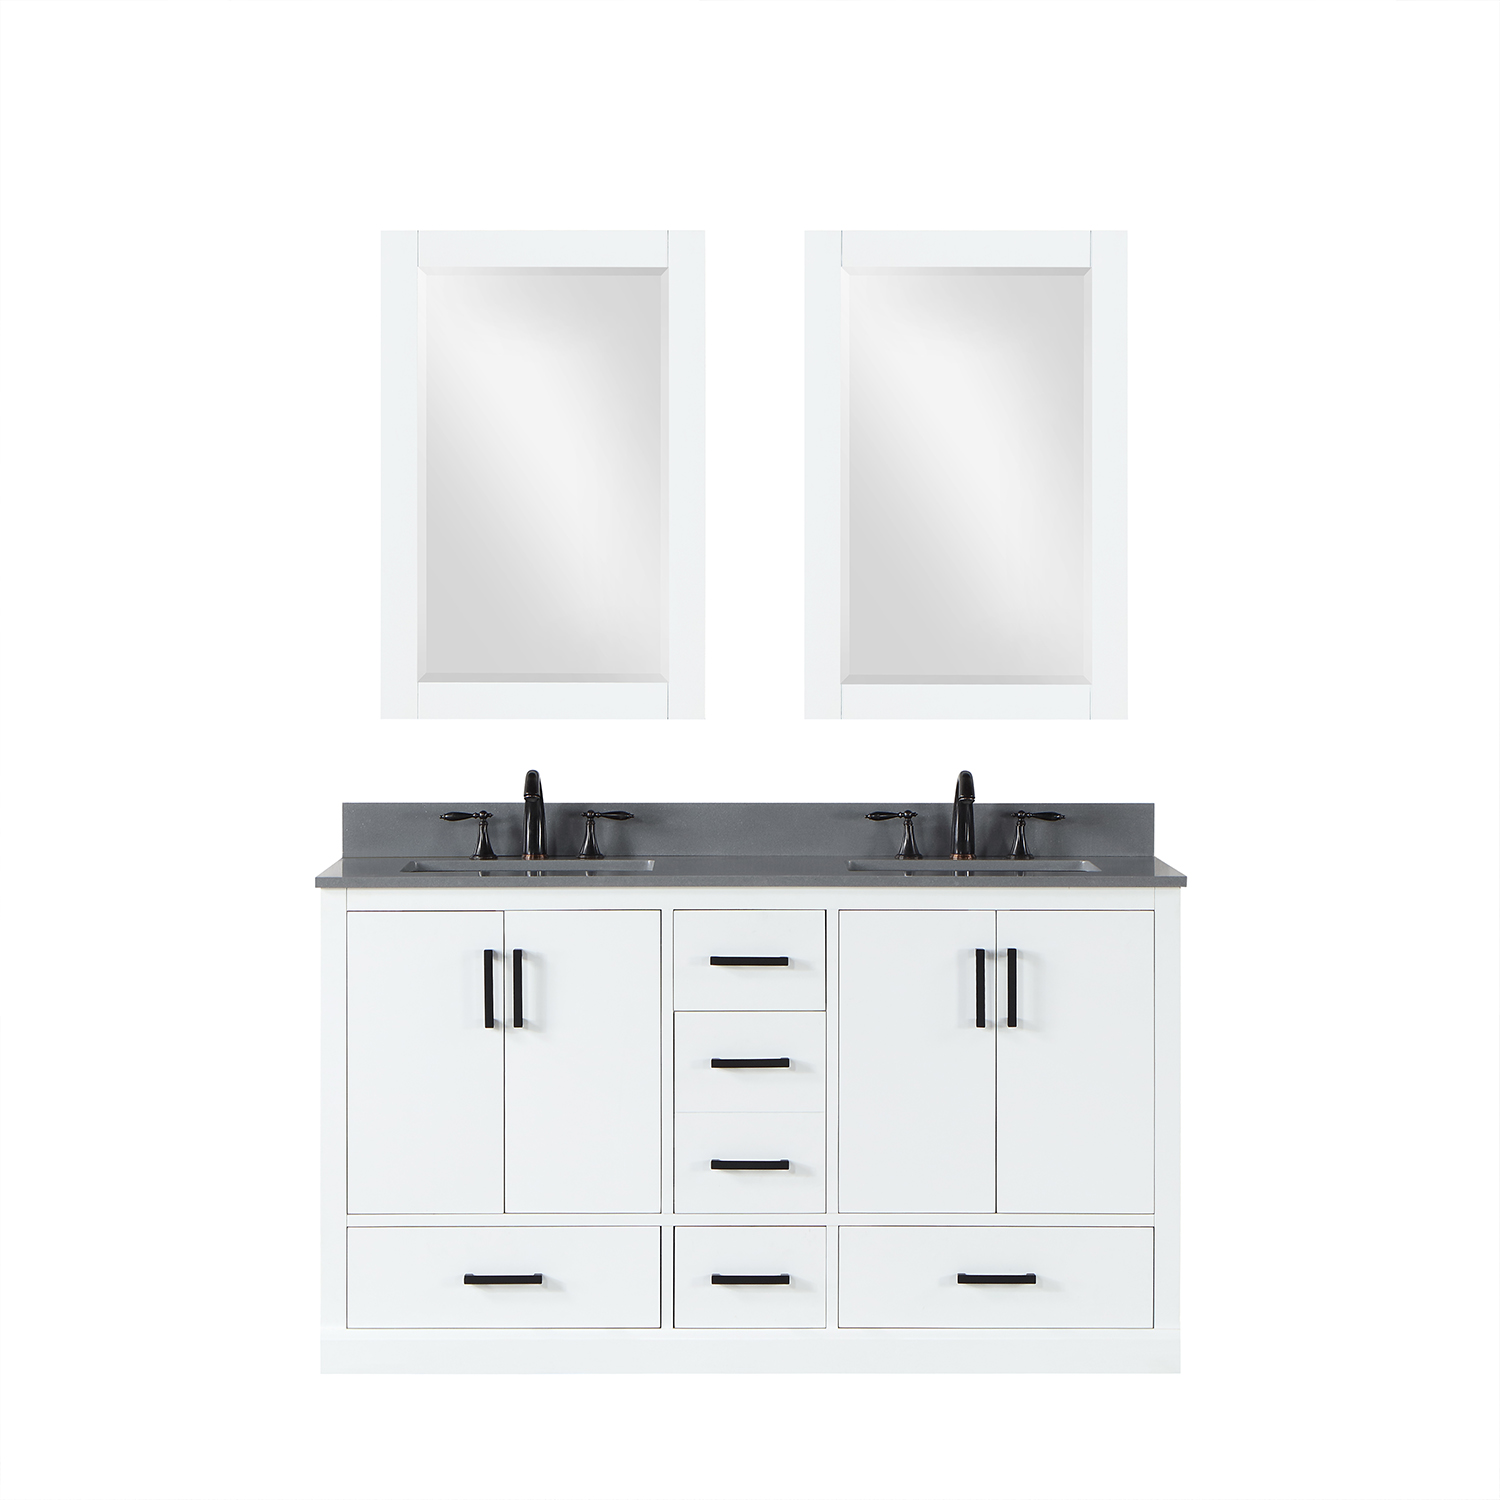 Issac Edwards Collection 60" Double Bathroom Vanity Set in White with Concrete Grey Composite Stone Countertop without Mirror 